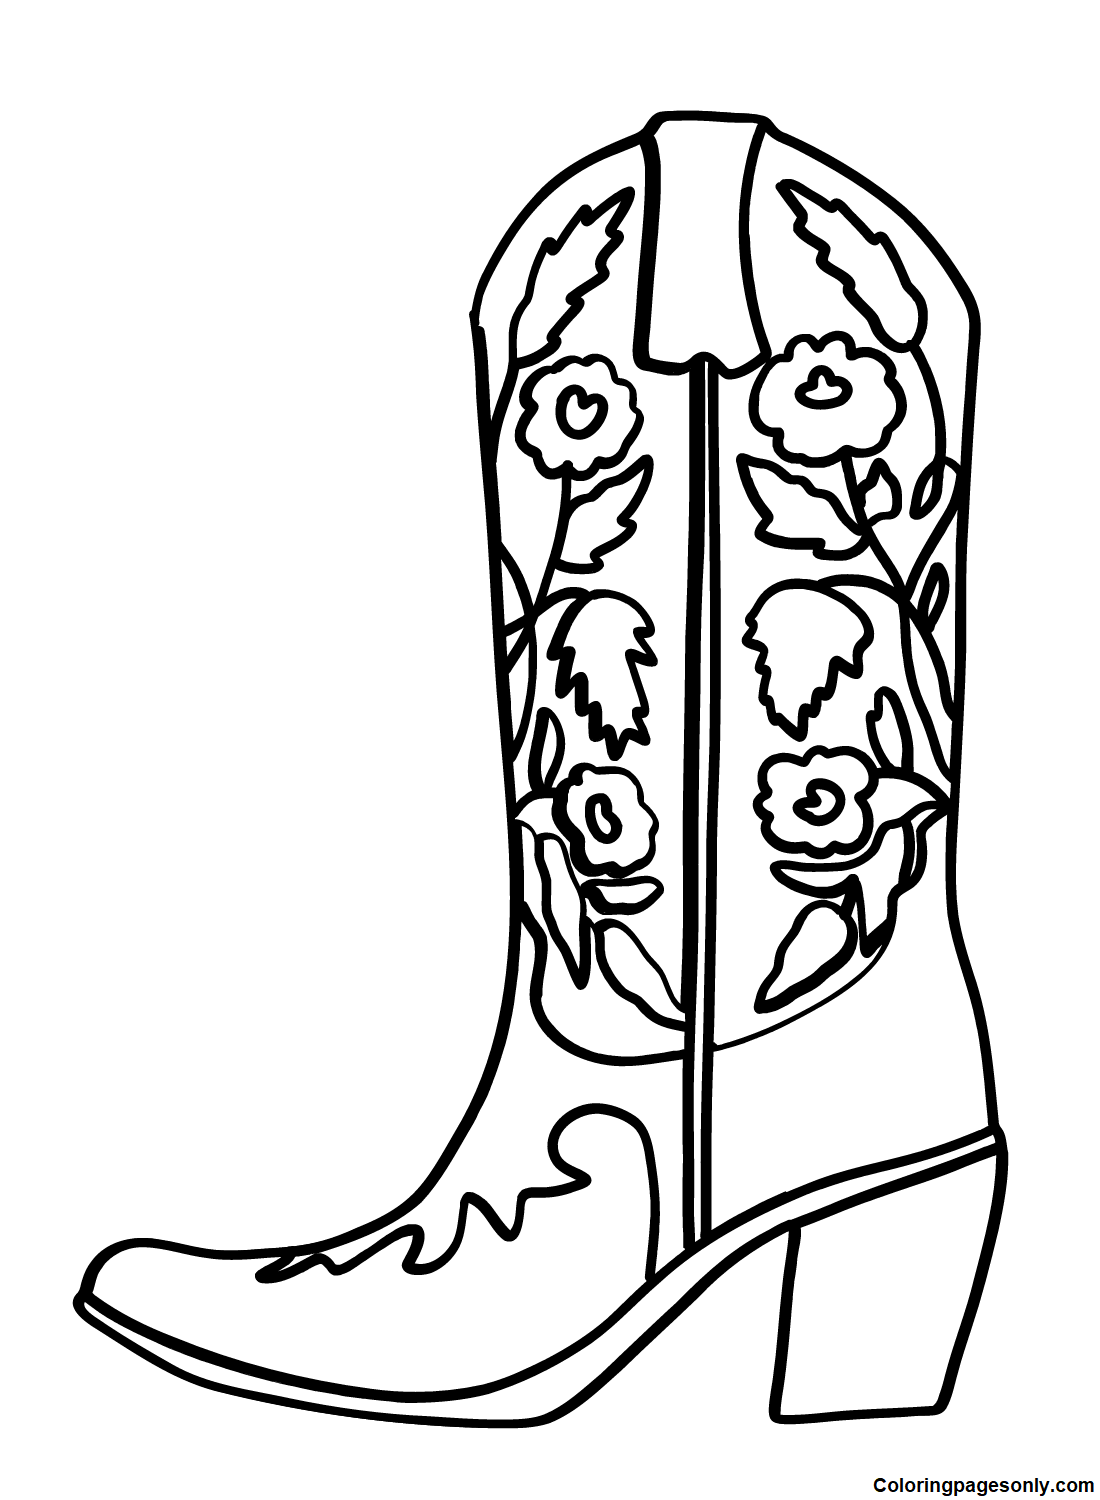 Boots Coloring Pages - Free Printable Coloring Pages